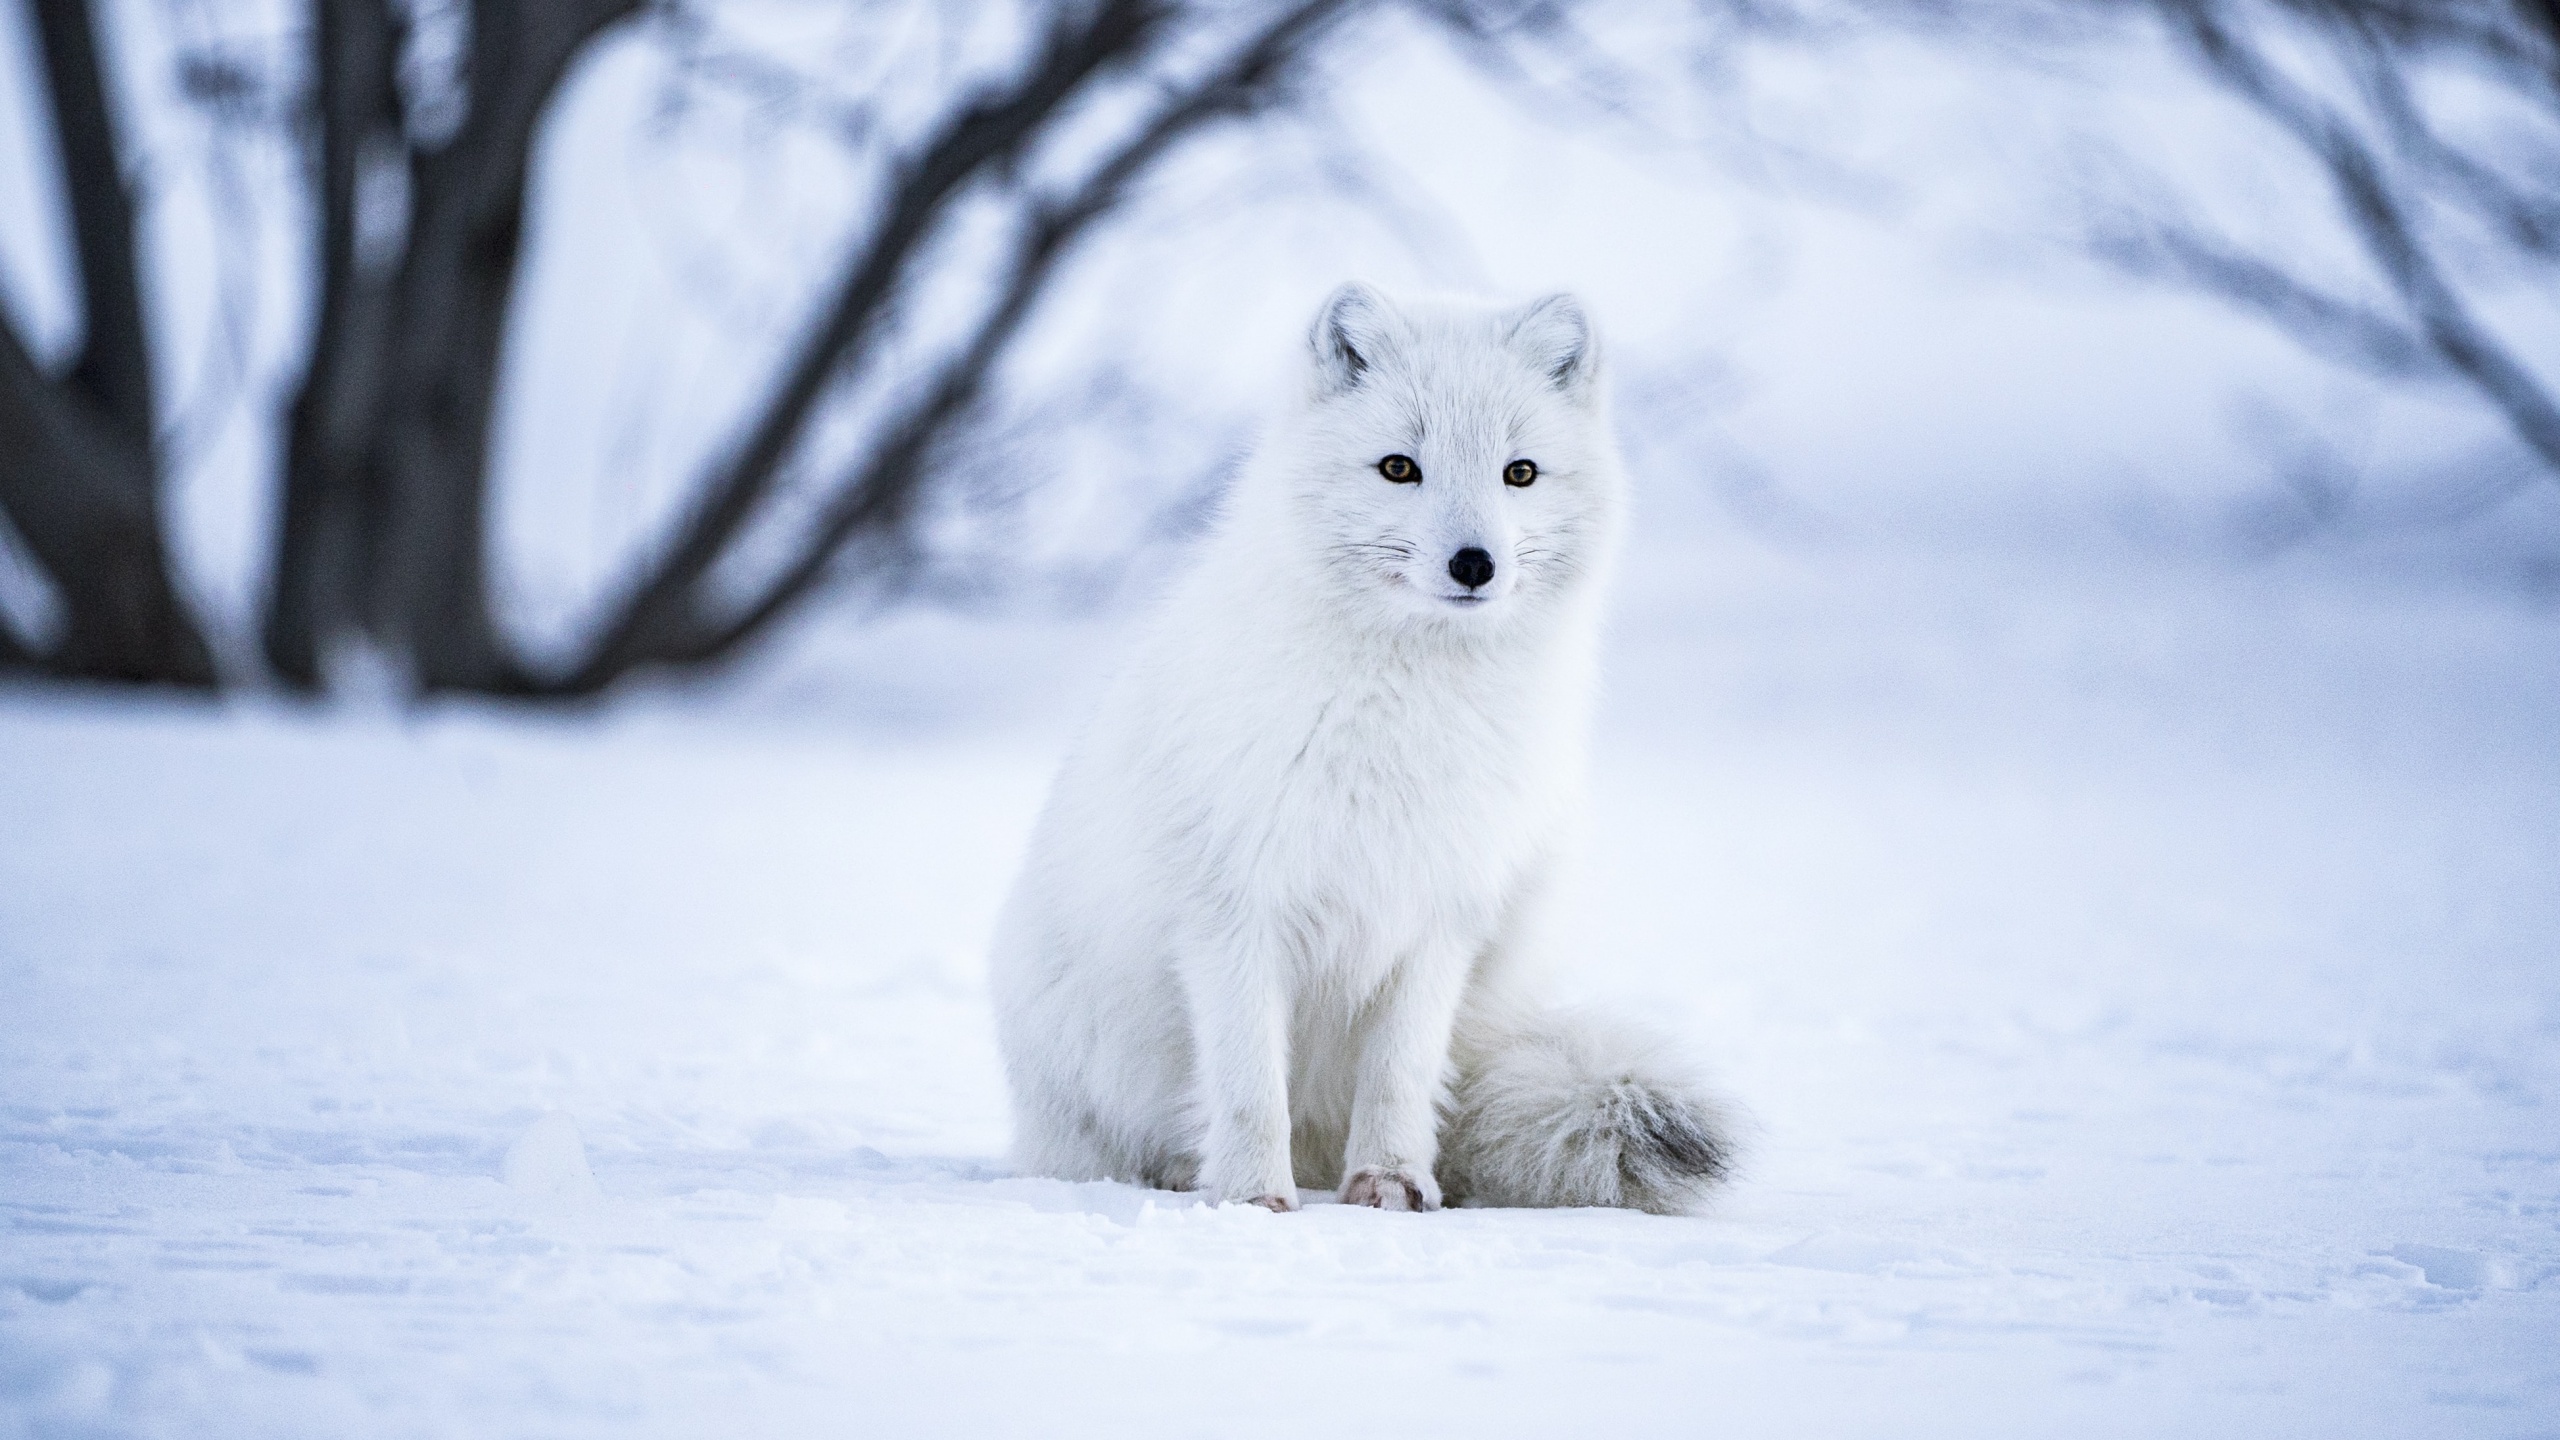 Arctic fox 4K Wallpaper, White wolf, Iceland, Snow field, Selective